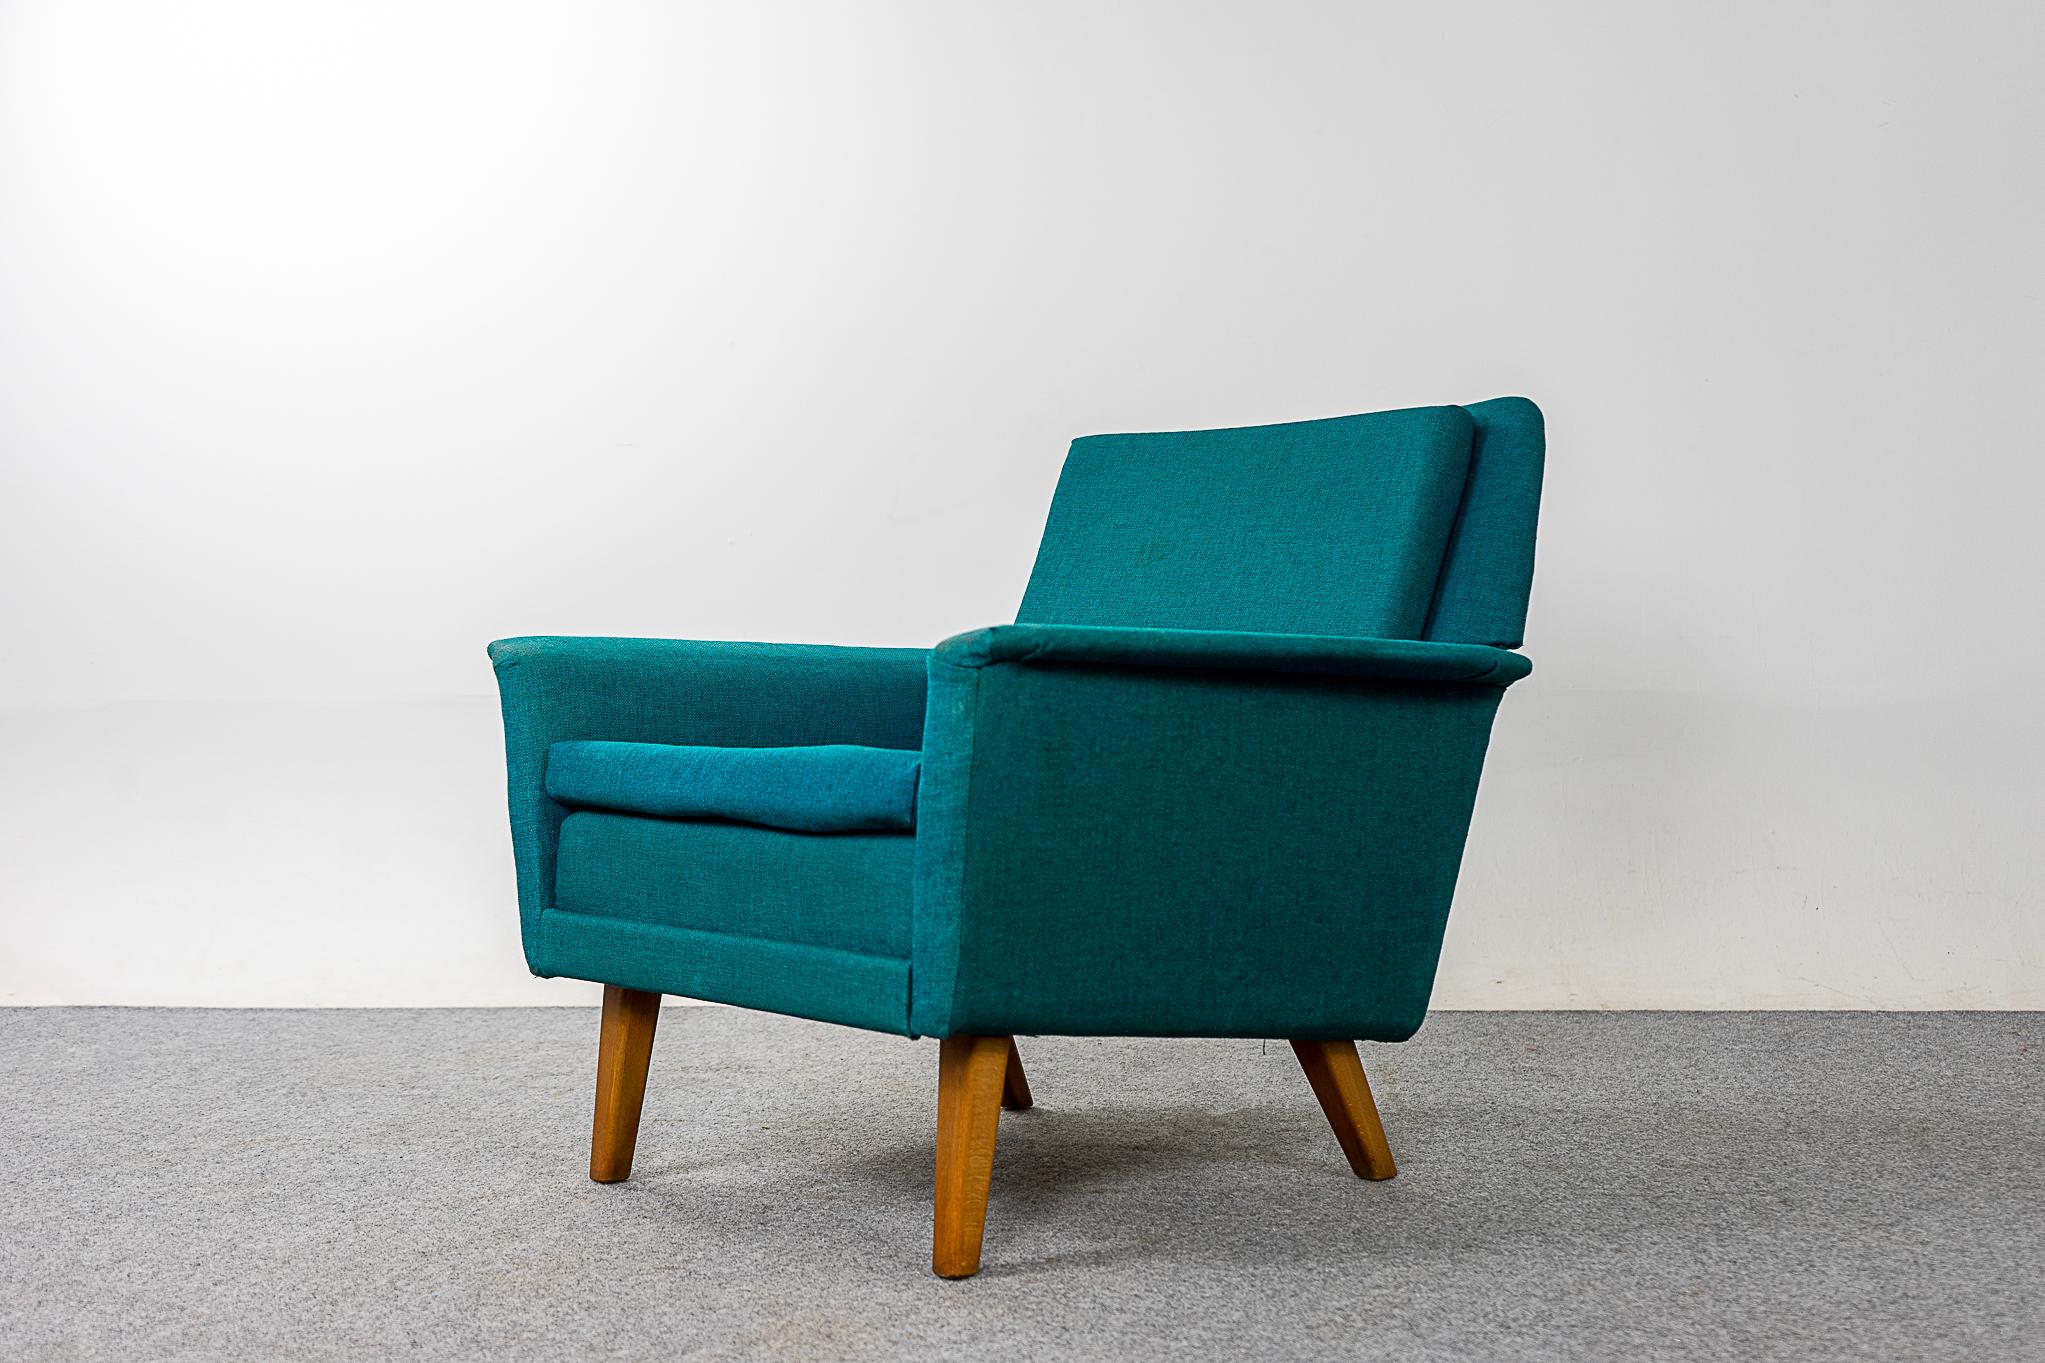 Beech wood Danish lounge chair by Fritz Hansen, circa 1960's. Elegant lounge chair with clean modern lines and contrasting solid beech legs. Original teal fabric shows wear & tear. Fritz Hansen makers mark intact!

Please inquire for international